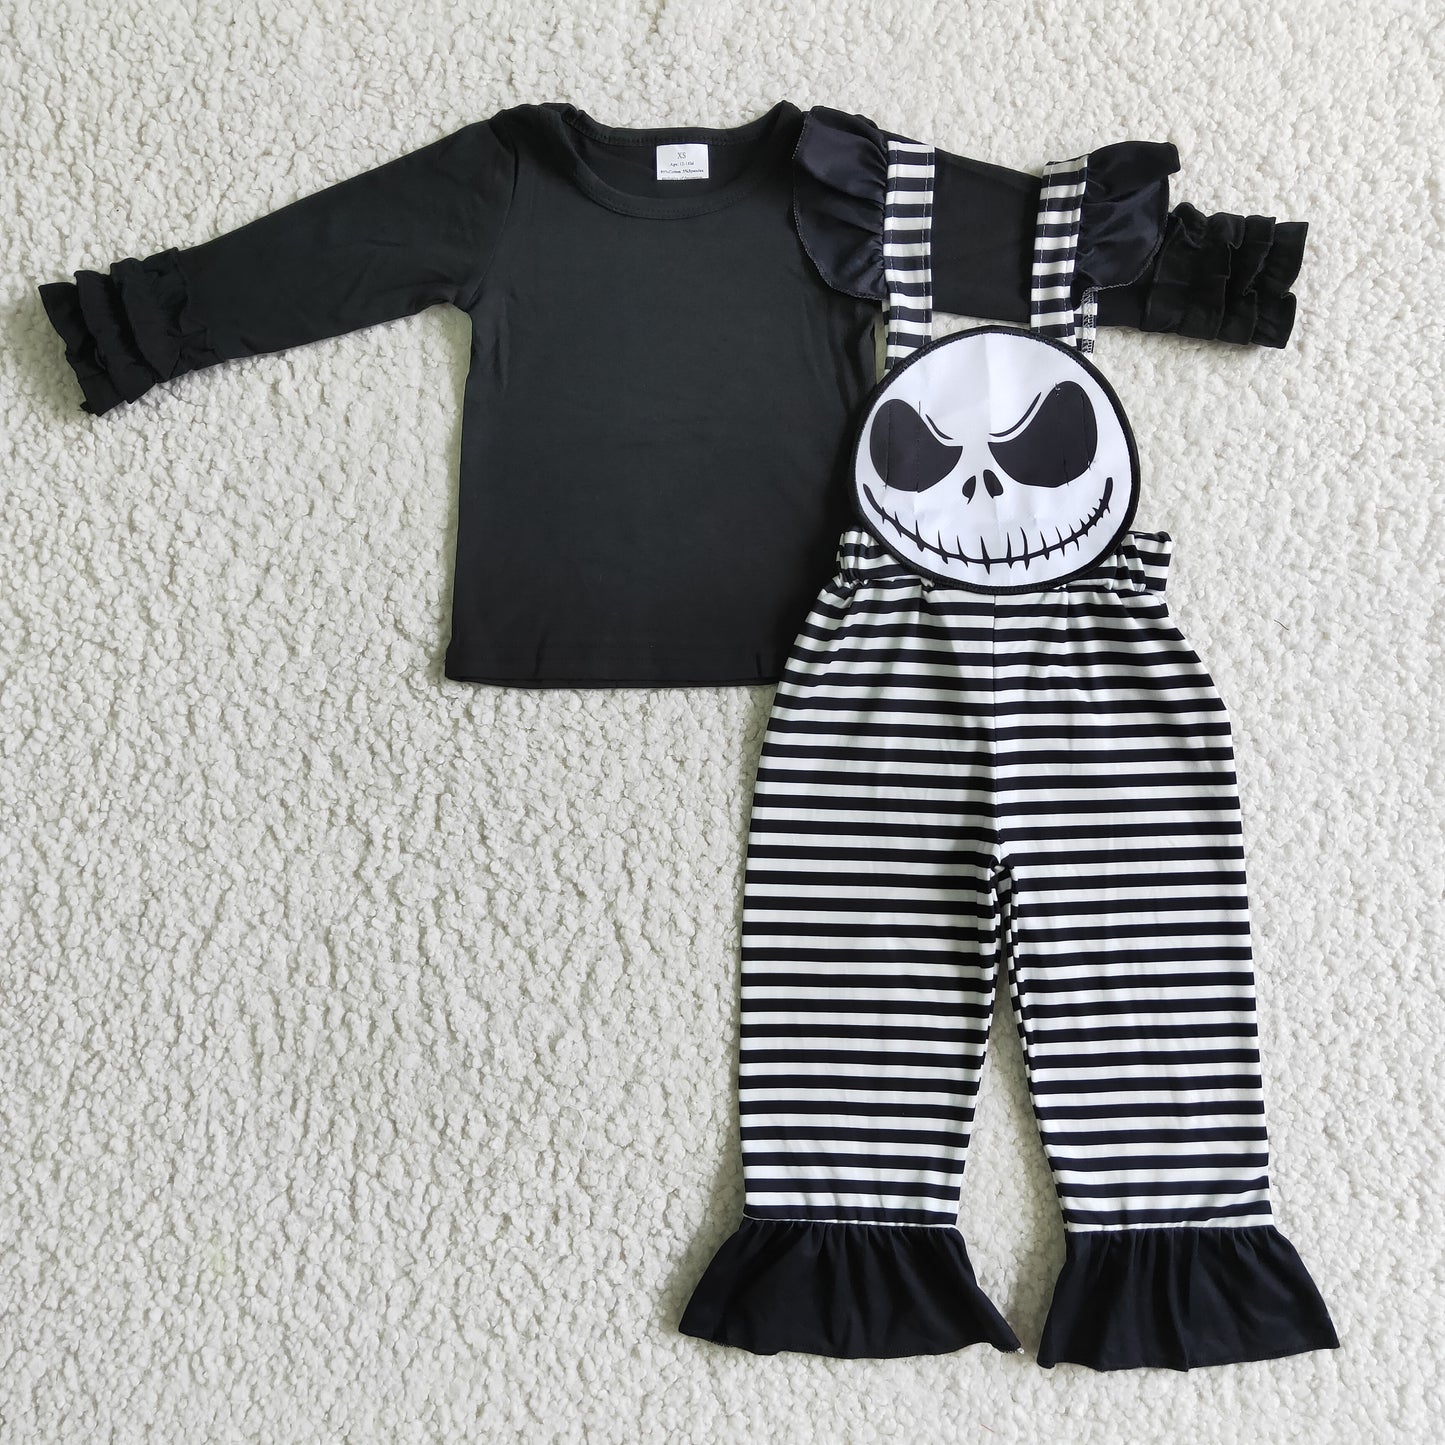 Black shirt skull embroidery stripe overalls girls Halloween clothes